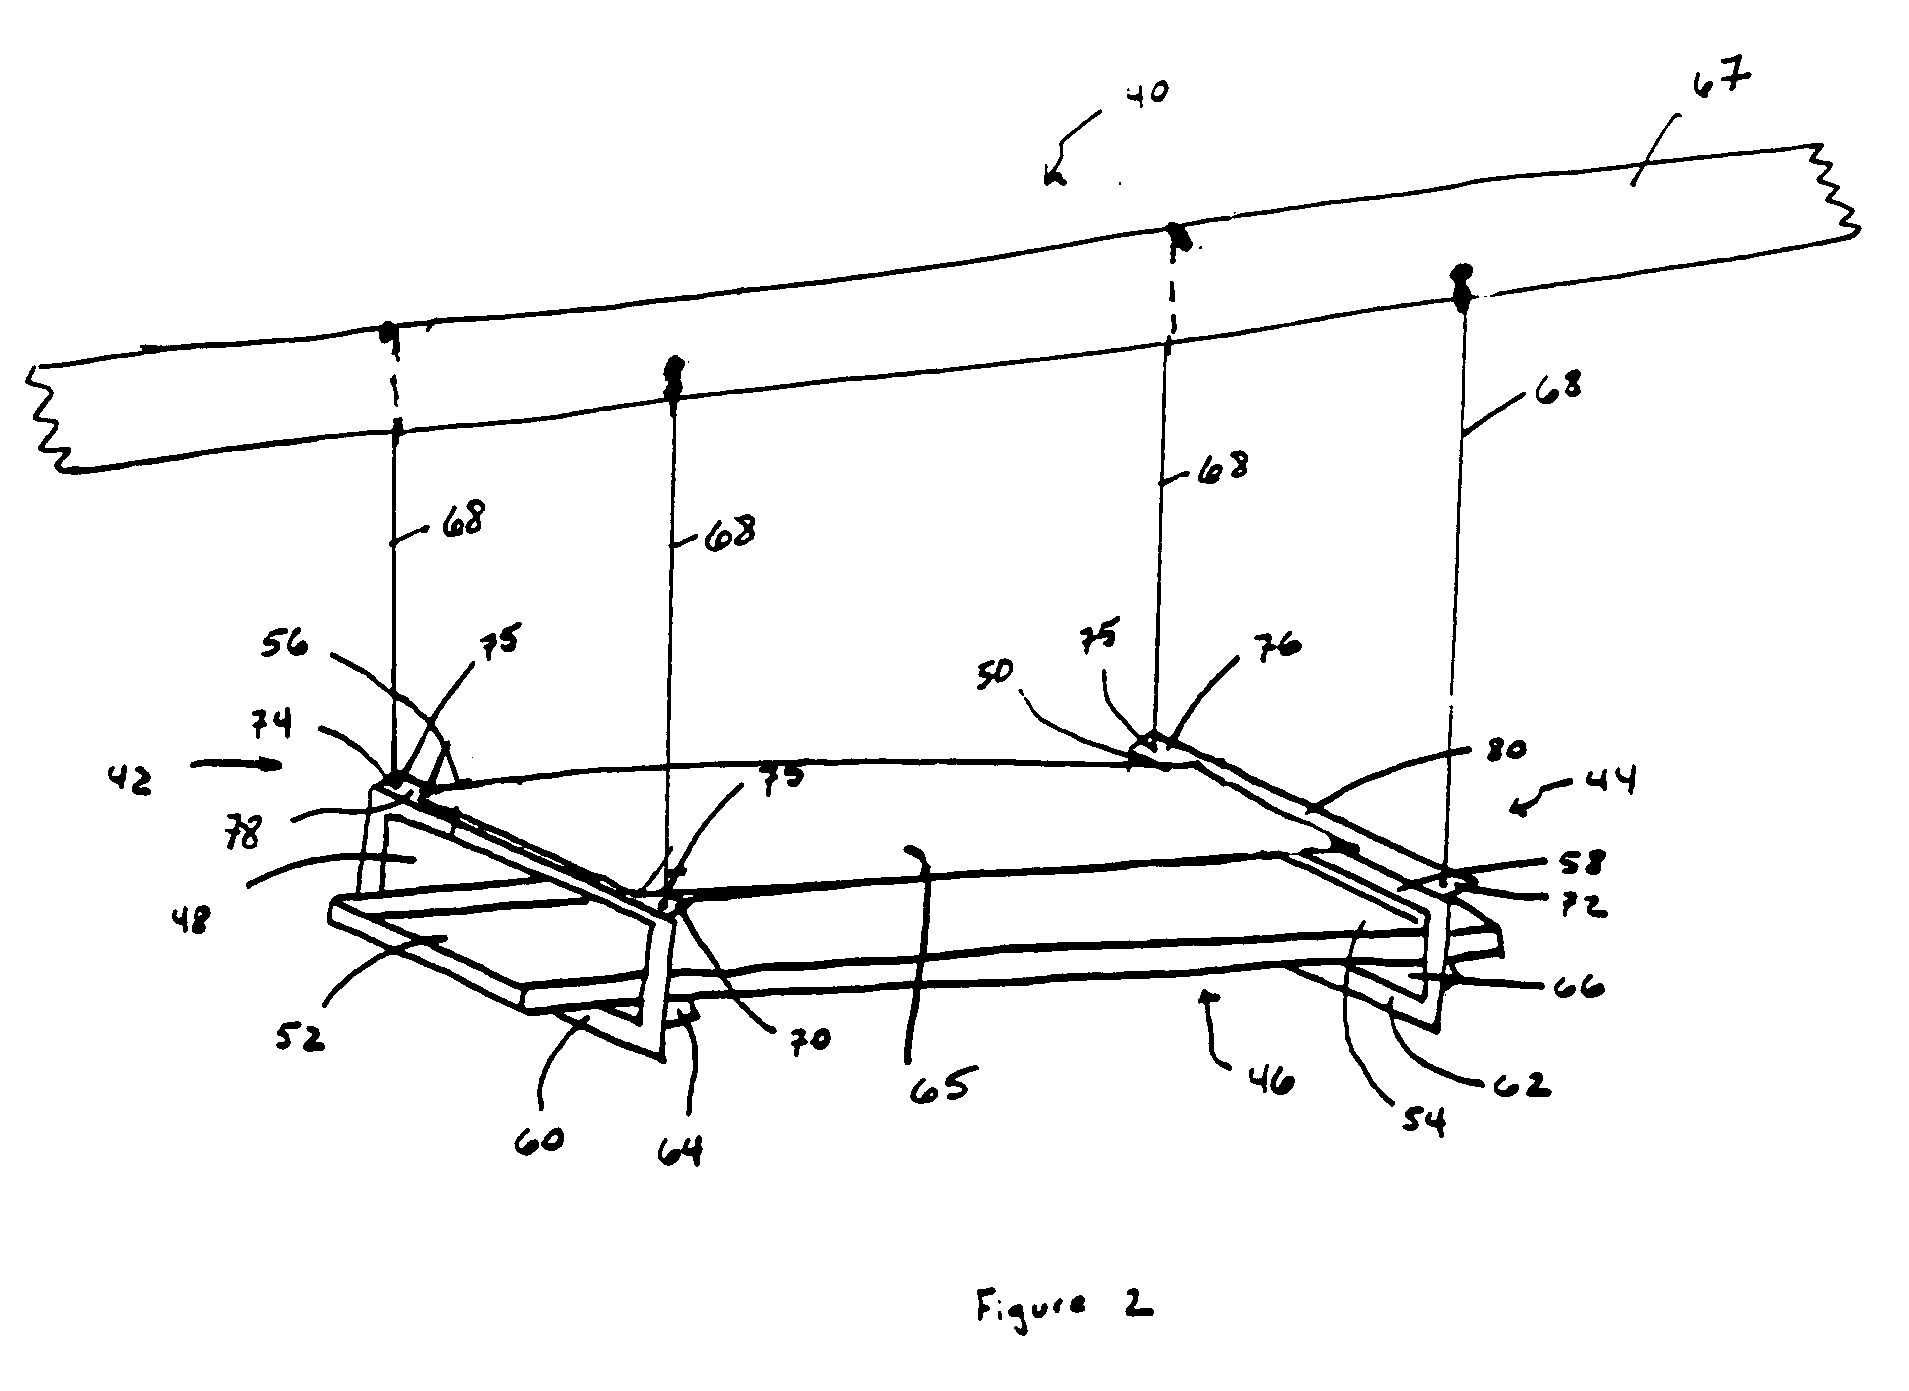 Suspension holding device and method of use